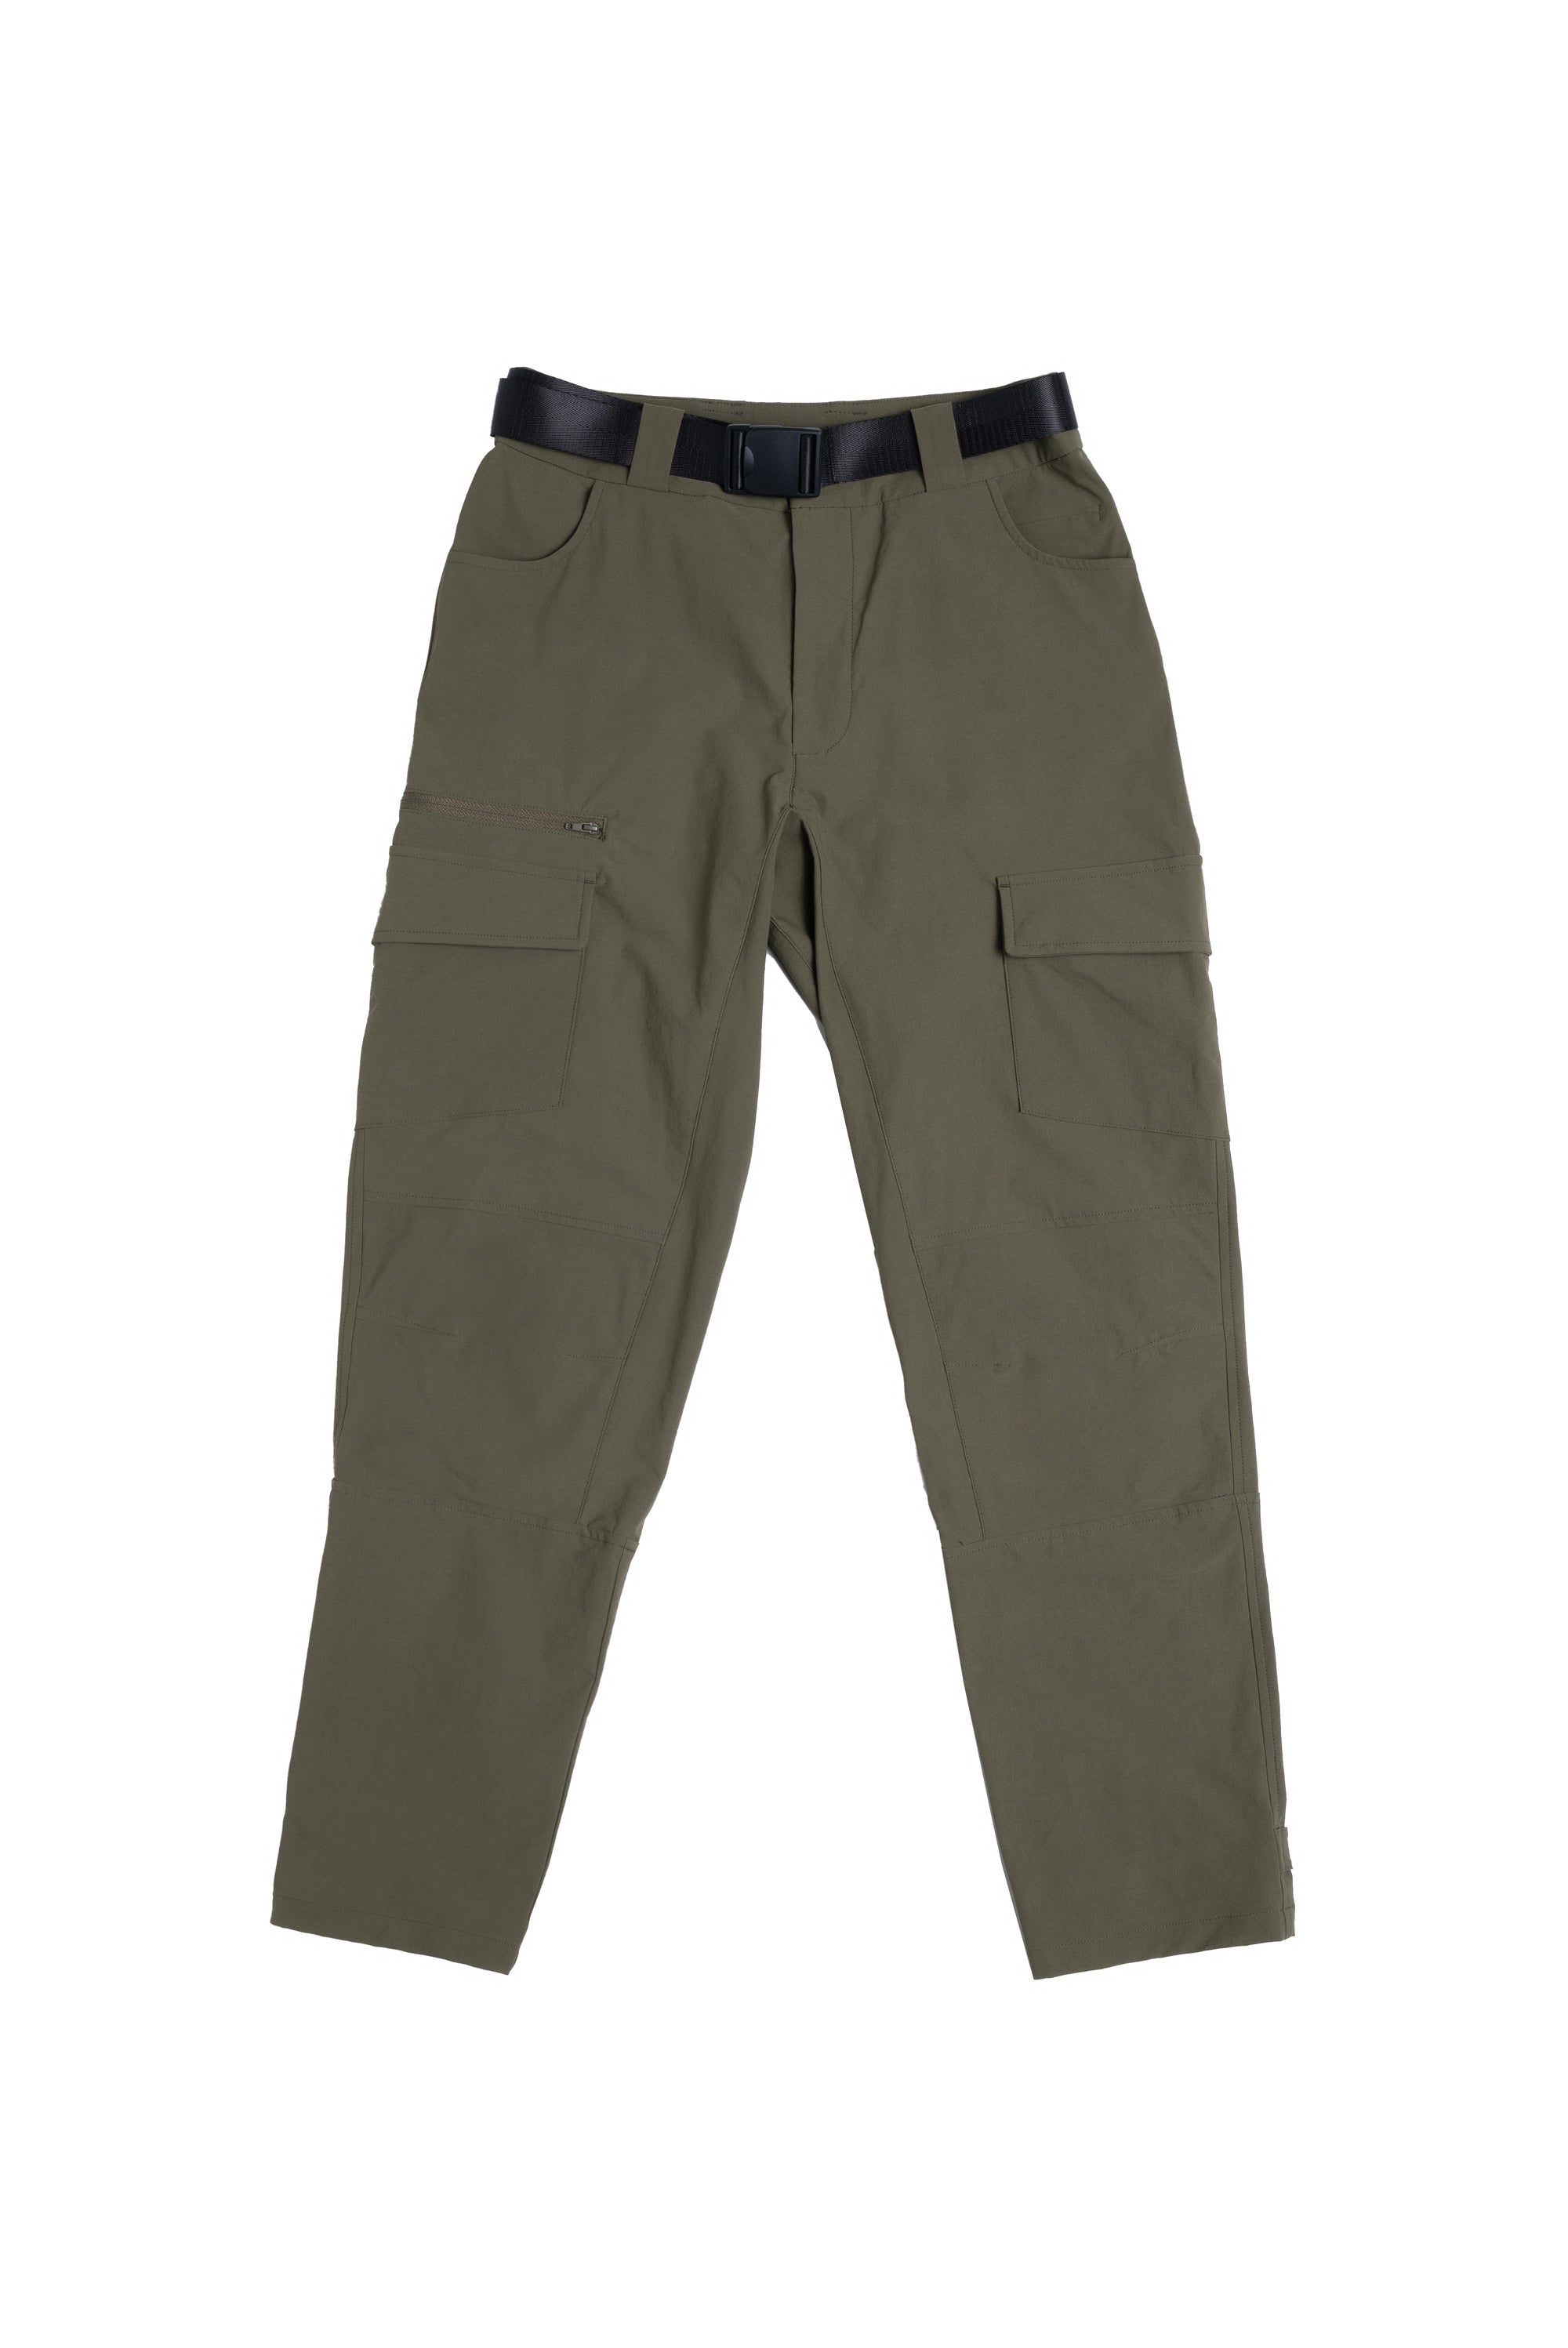 Reviewers Can't Get Enough Of These Quick-Dry Hiking Pants